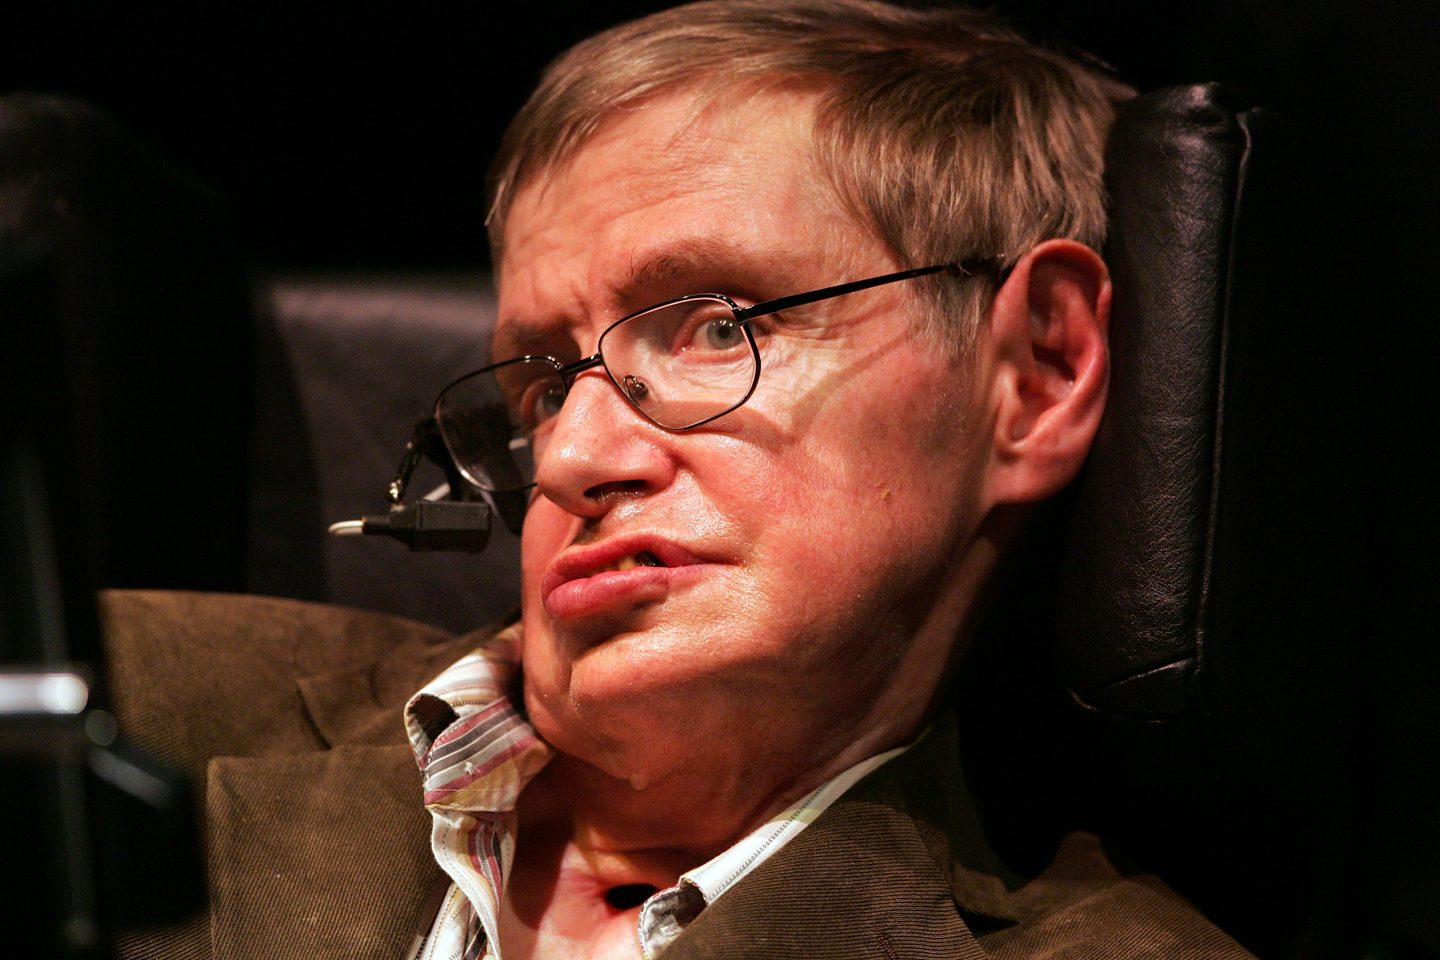 Stephen Hawking delivering a lecture at Berkeley in 2007.